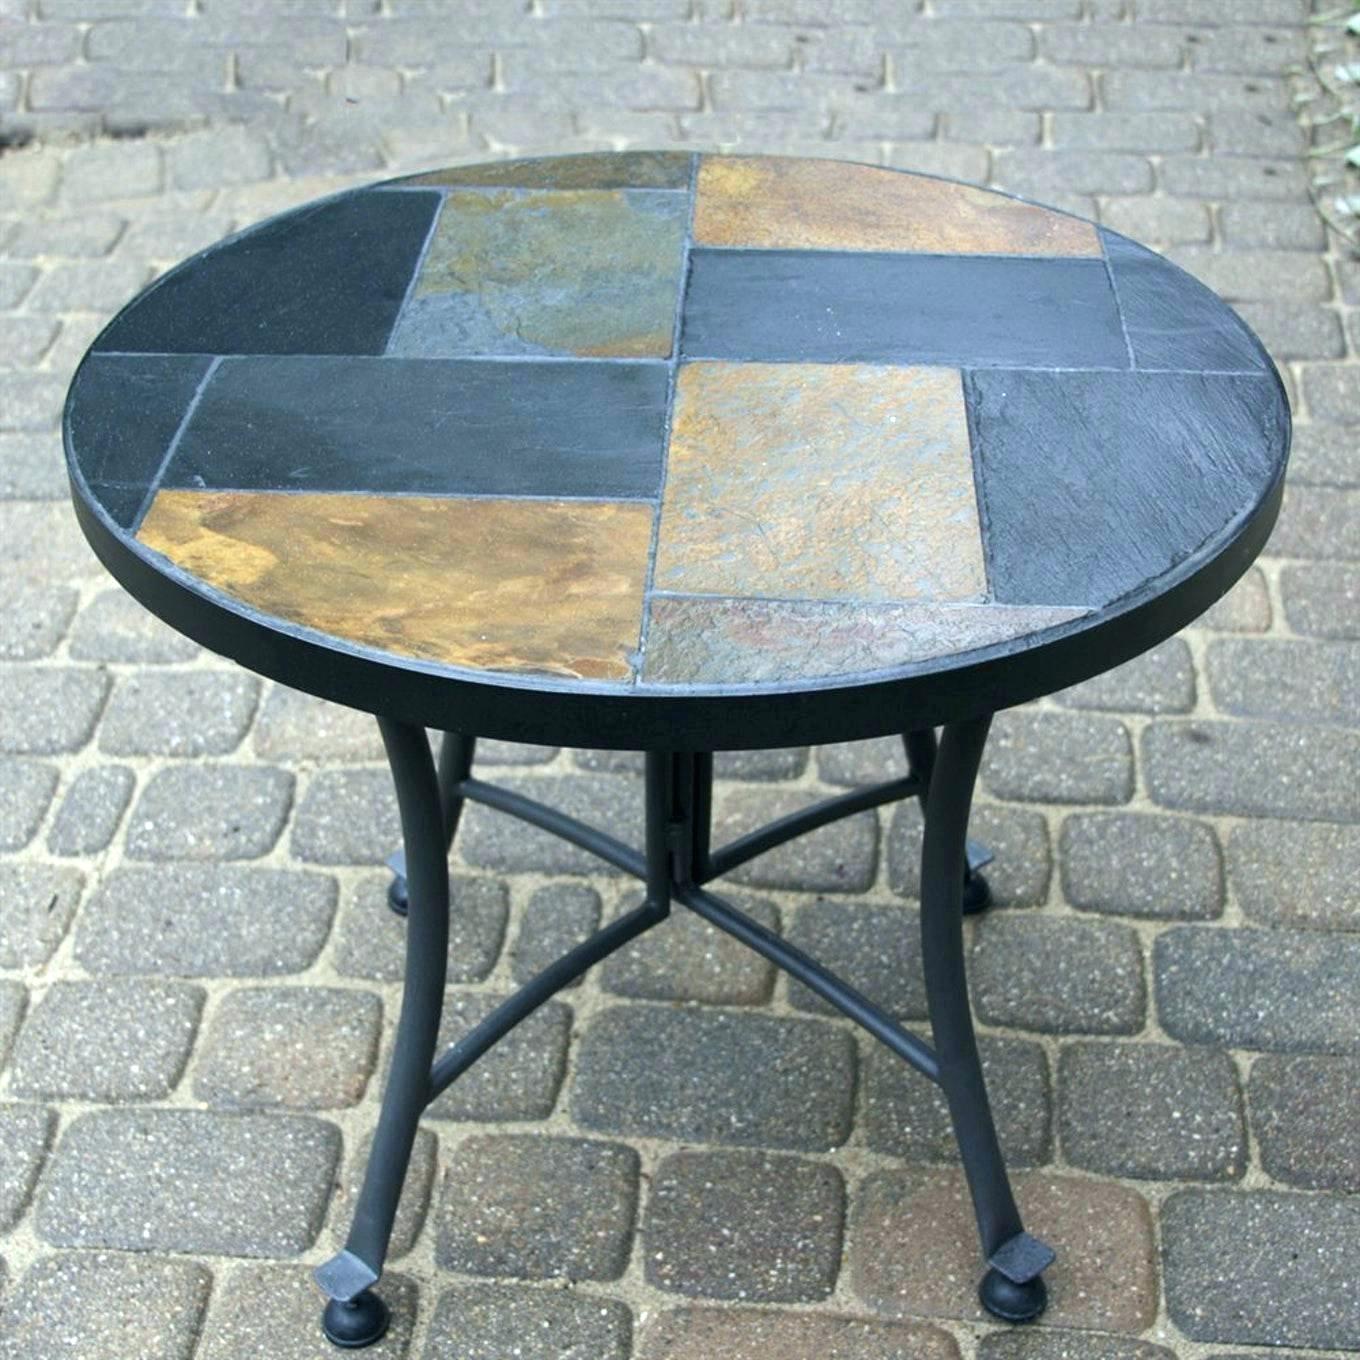 outdoor side table blue mosaic tile wicker with storage woodworking plans target small umbrella hole piece patio set antique white accent mainstays square pink marble inch